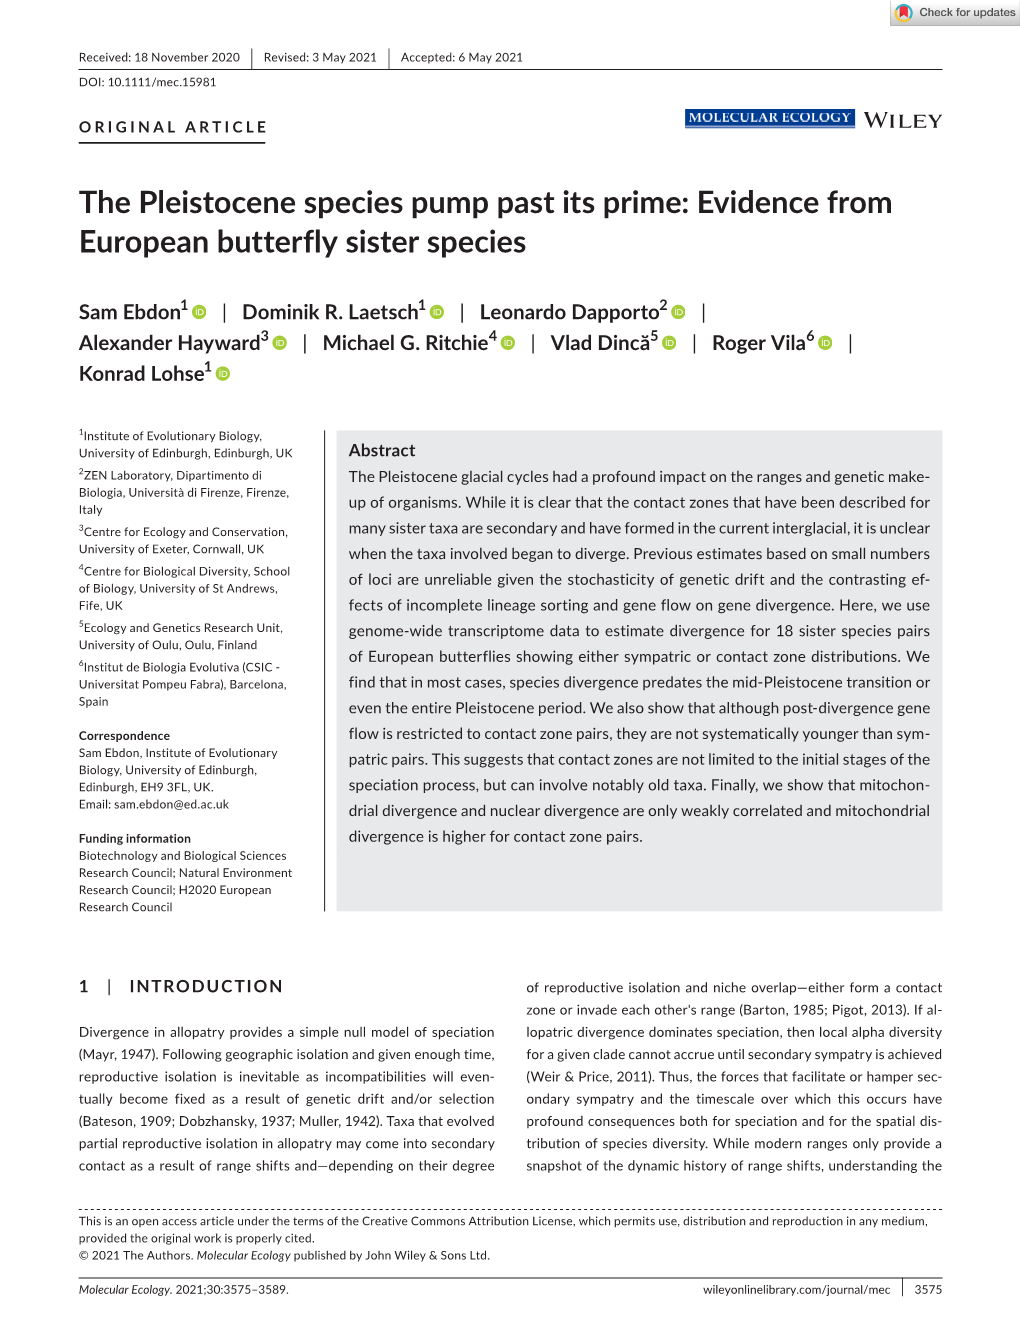 The Pleistocene Species Pump Past Its Prime: Evidence from European Butterfly Sister Species